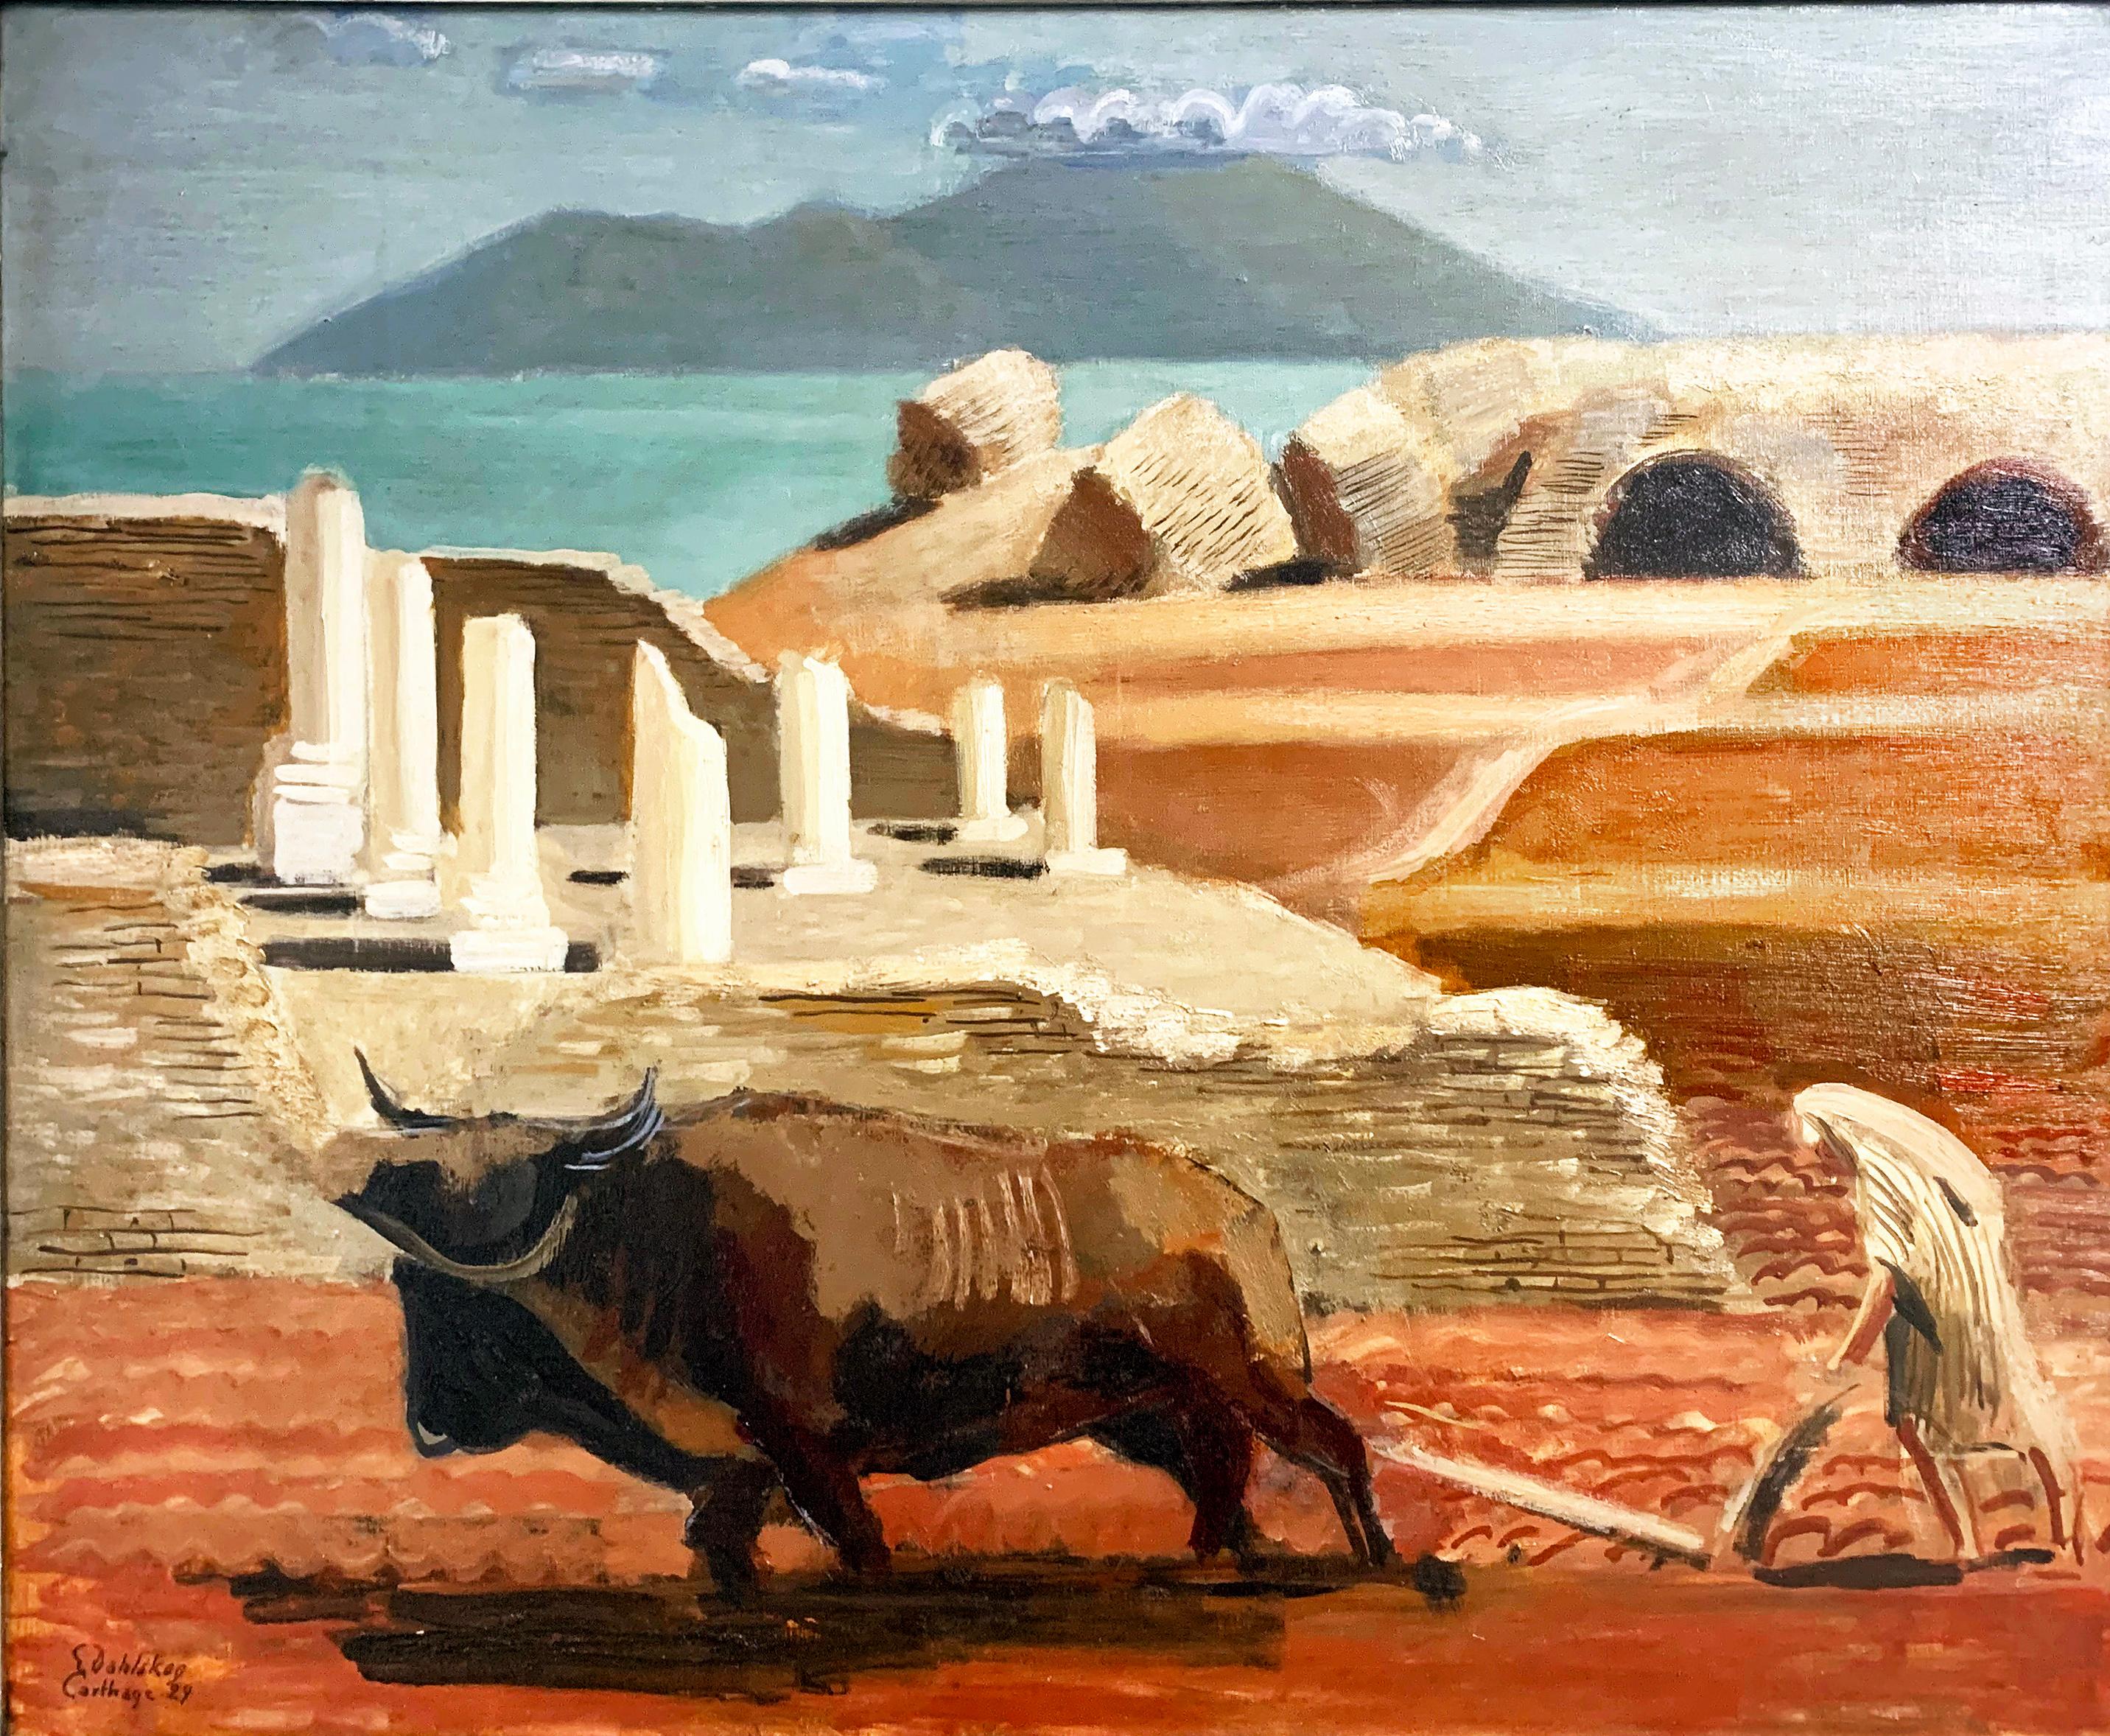 Highly atmospheric and richly colored, this 1929 vintage landscape by a Swedish painter depicts layers of history and tradition, from the man in traditional Arab garb plowing the fields with his ox in the foreground, to broken Roman columns in